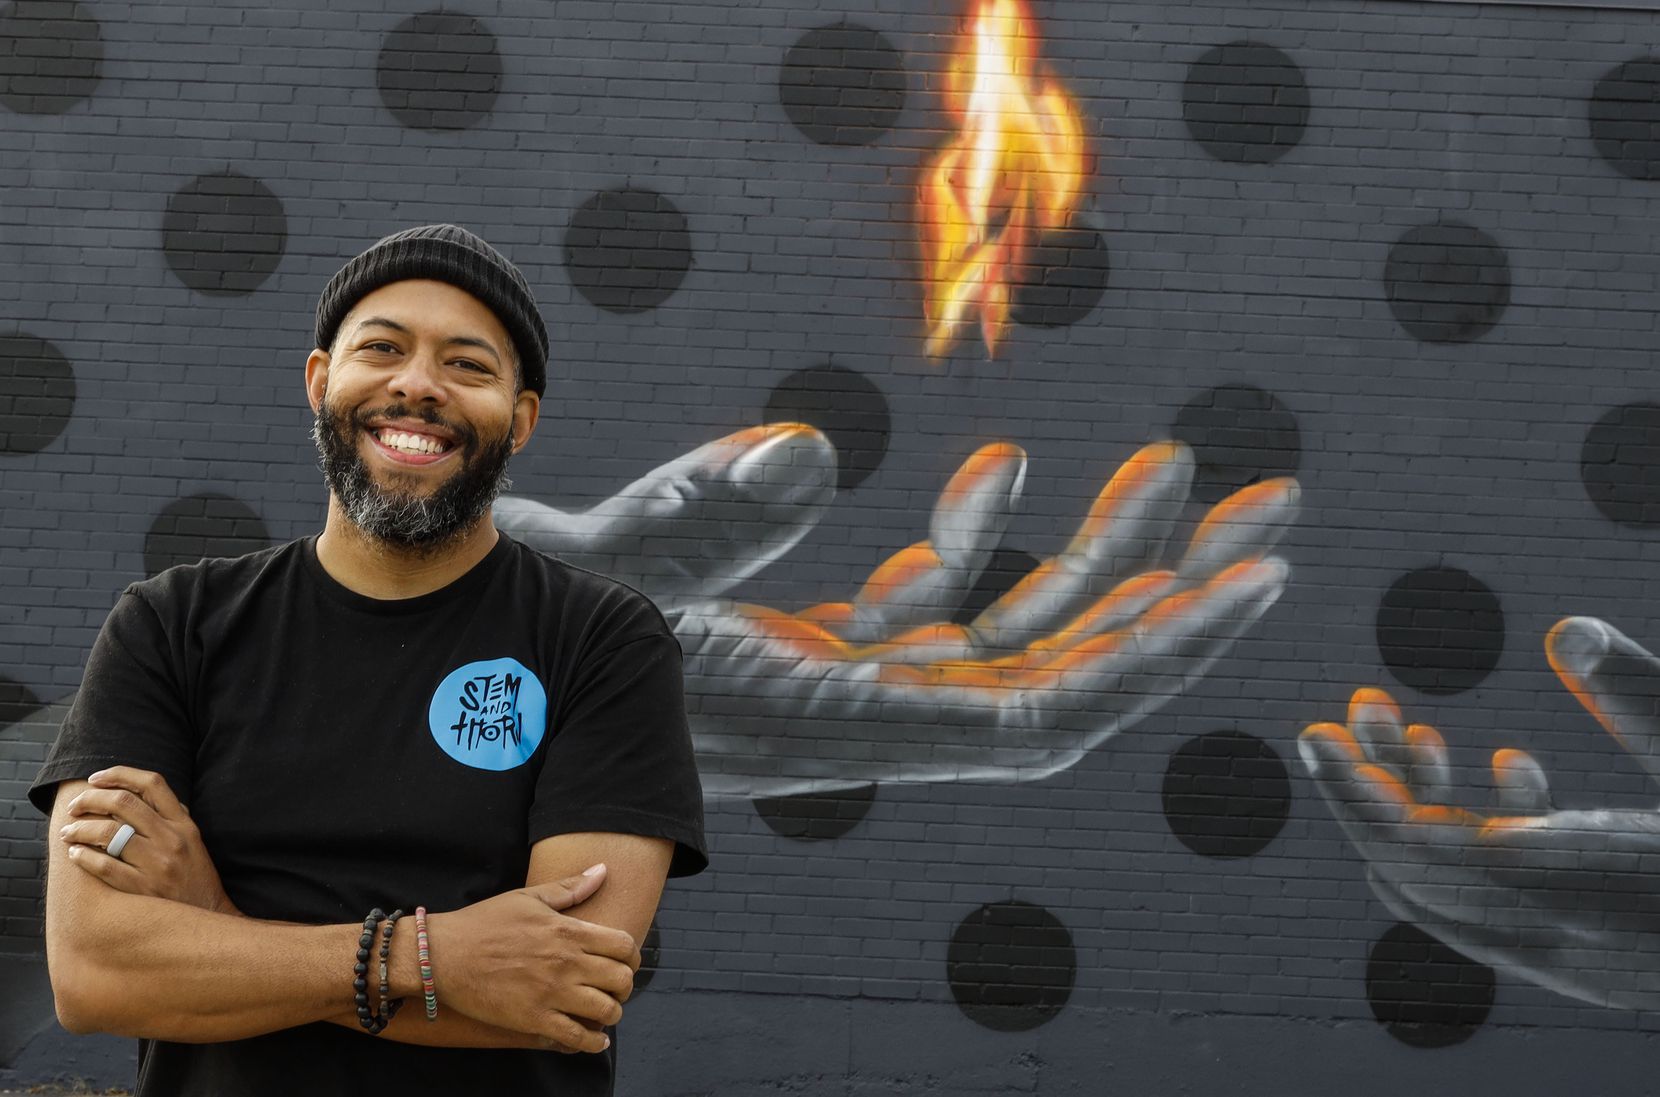 Jeremy Biggers posed for a portrait in front of his mural "Legacy" in Dallas on Nov. 18, 2021. The mural illustrates a flame passed from his hand to his 3-year-old daughter's hand. "A lot of murals that I work on are bread crumbs left to my daughter all over the city that are little love letters to her" Biggers says.